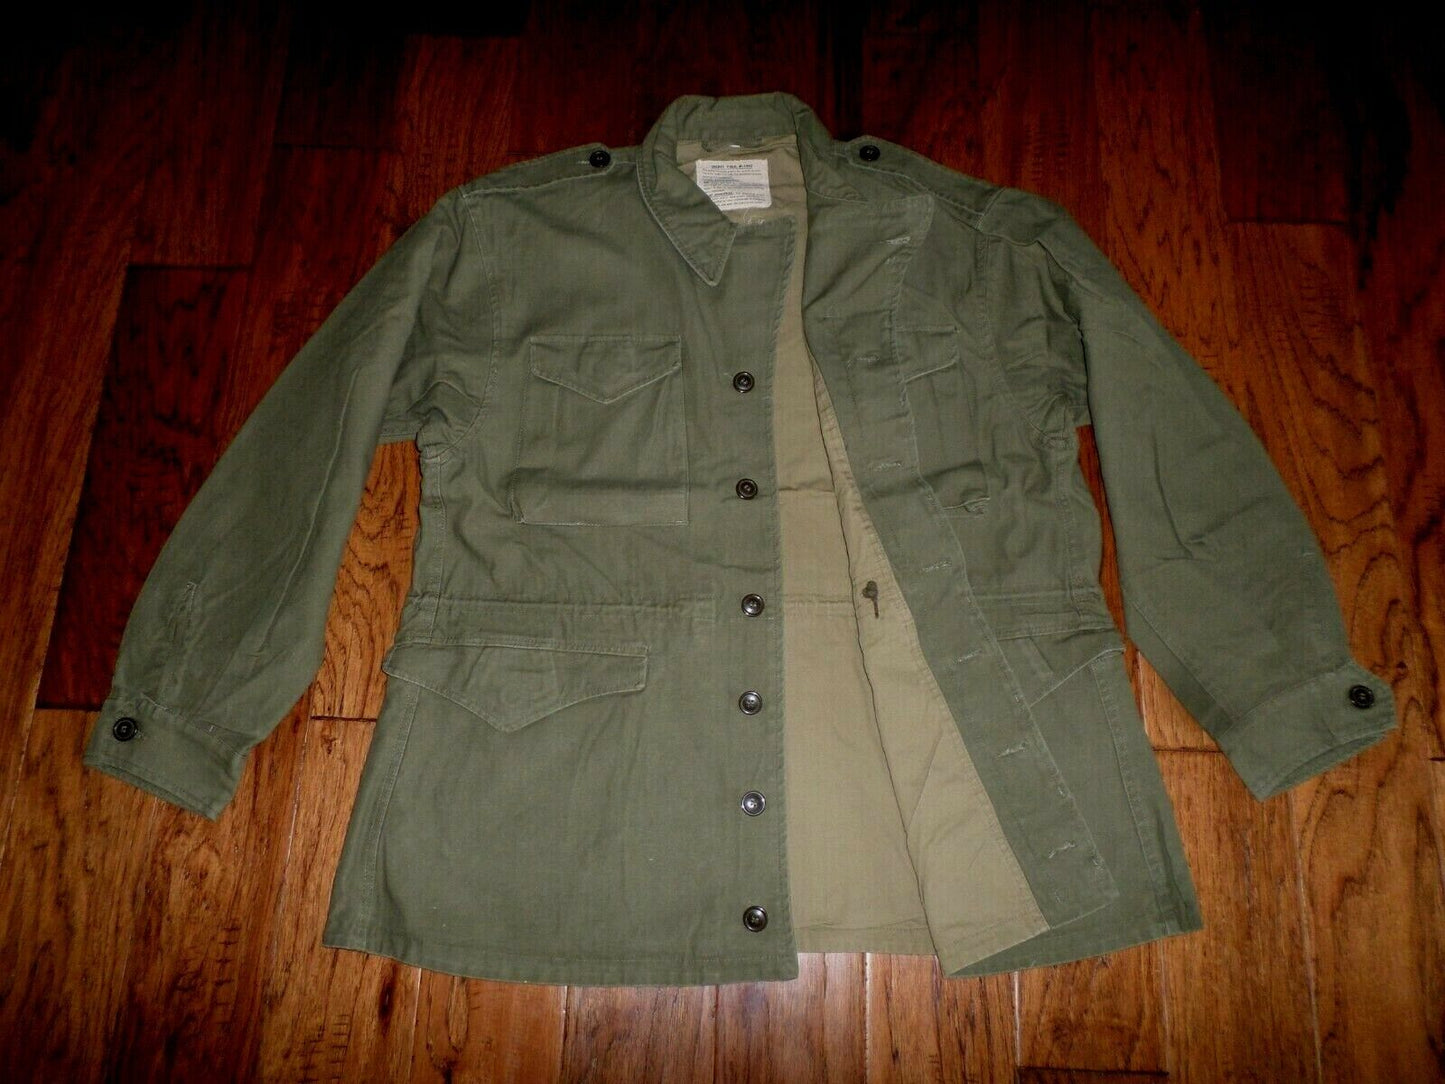 U.S MILITARY M43 FIELD JACKET M-1943 OD GREEN SIZE 50 XX LARGE WWII REPRODUCTION